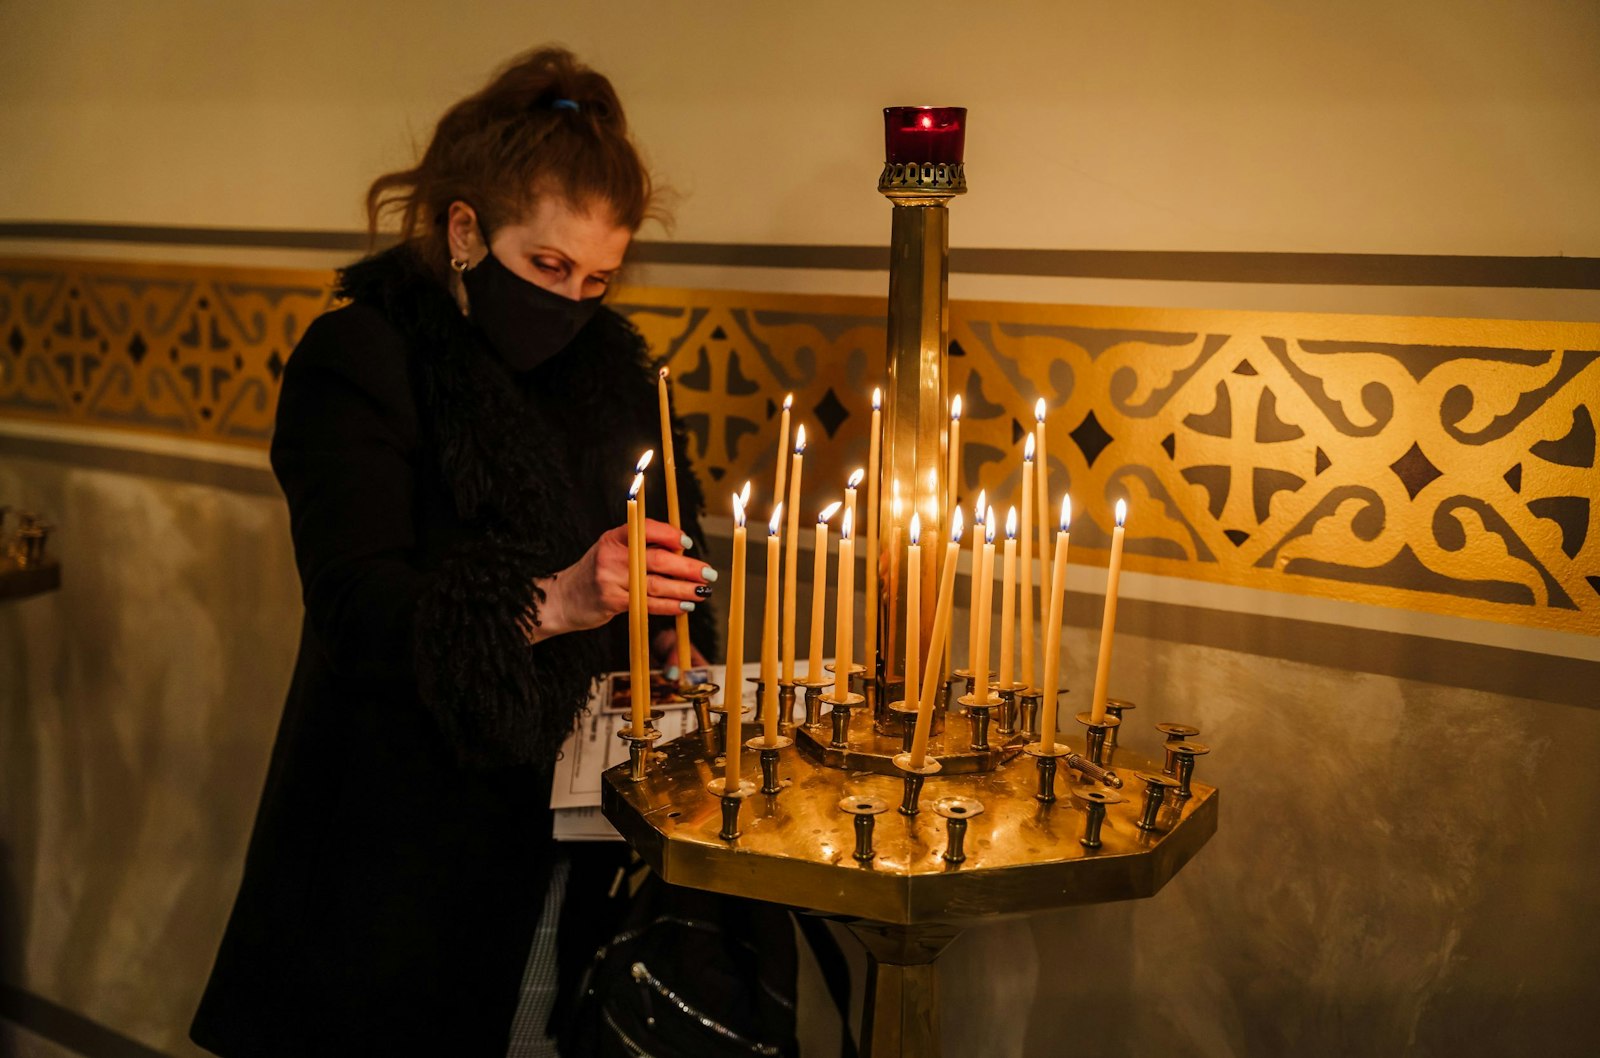 A woman lights votive candles at St. Mary the Protectress Ukrainian Orthodox Cathedral in Southfield on Feb. 5, where members of the local Ukrainian Catholic and Orthodox communities gathered to pray for a diffusion of tensions along the Russia-Ukraine border, where Russian forces have assembled en masse, threatening the security of its eastern European neighbor. (Valaurian Waller | Detroit Catholic)